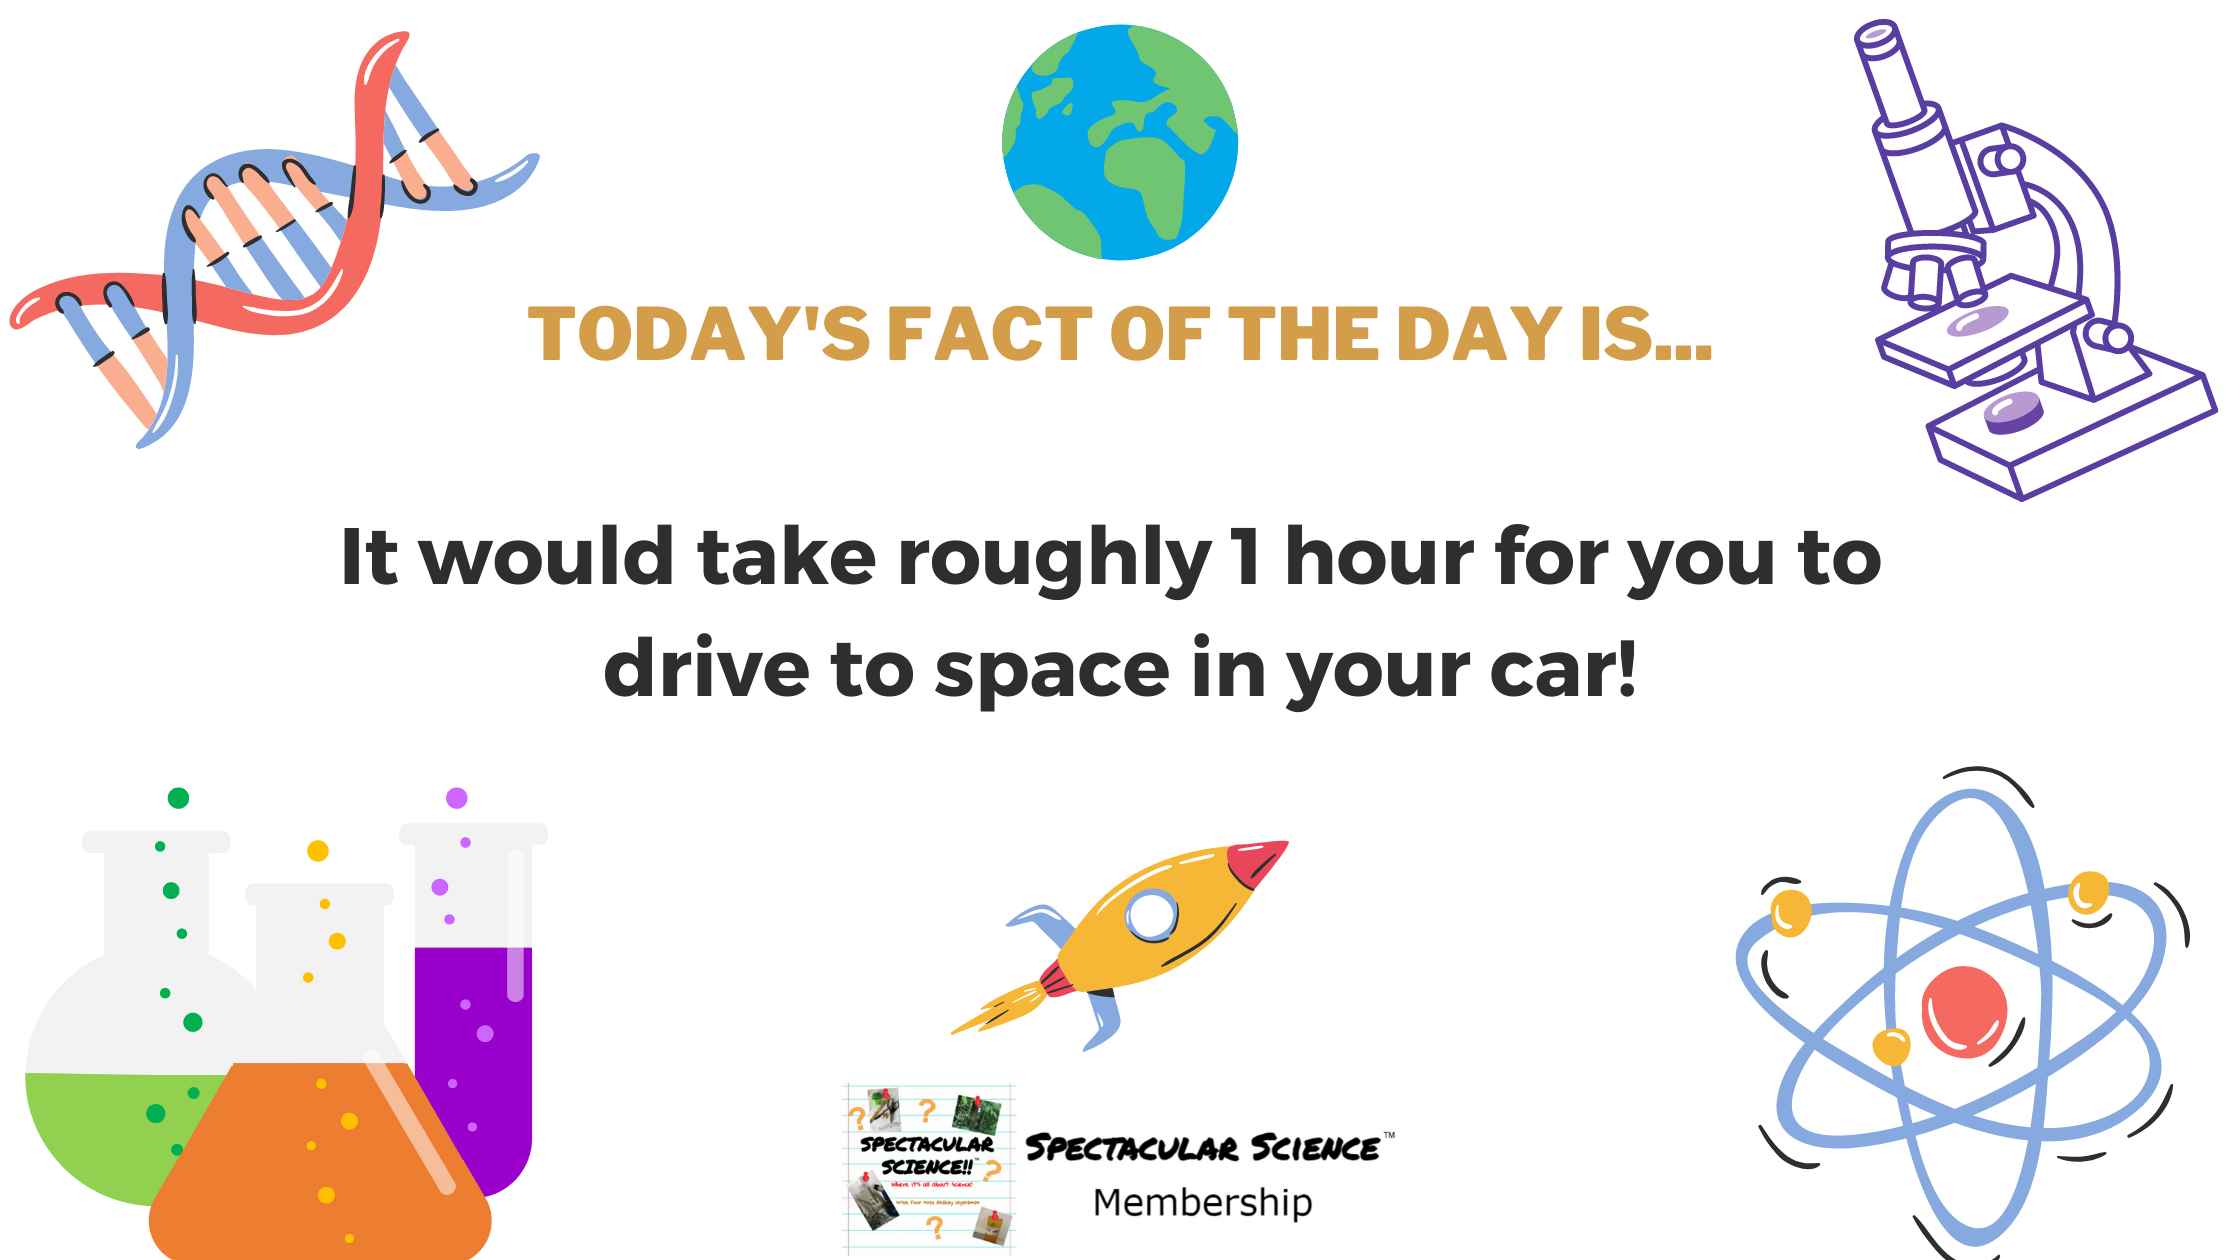 Fact of the Day Image Mar. 10th